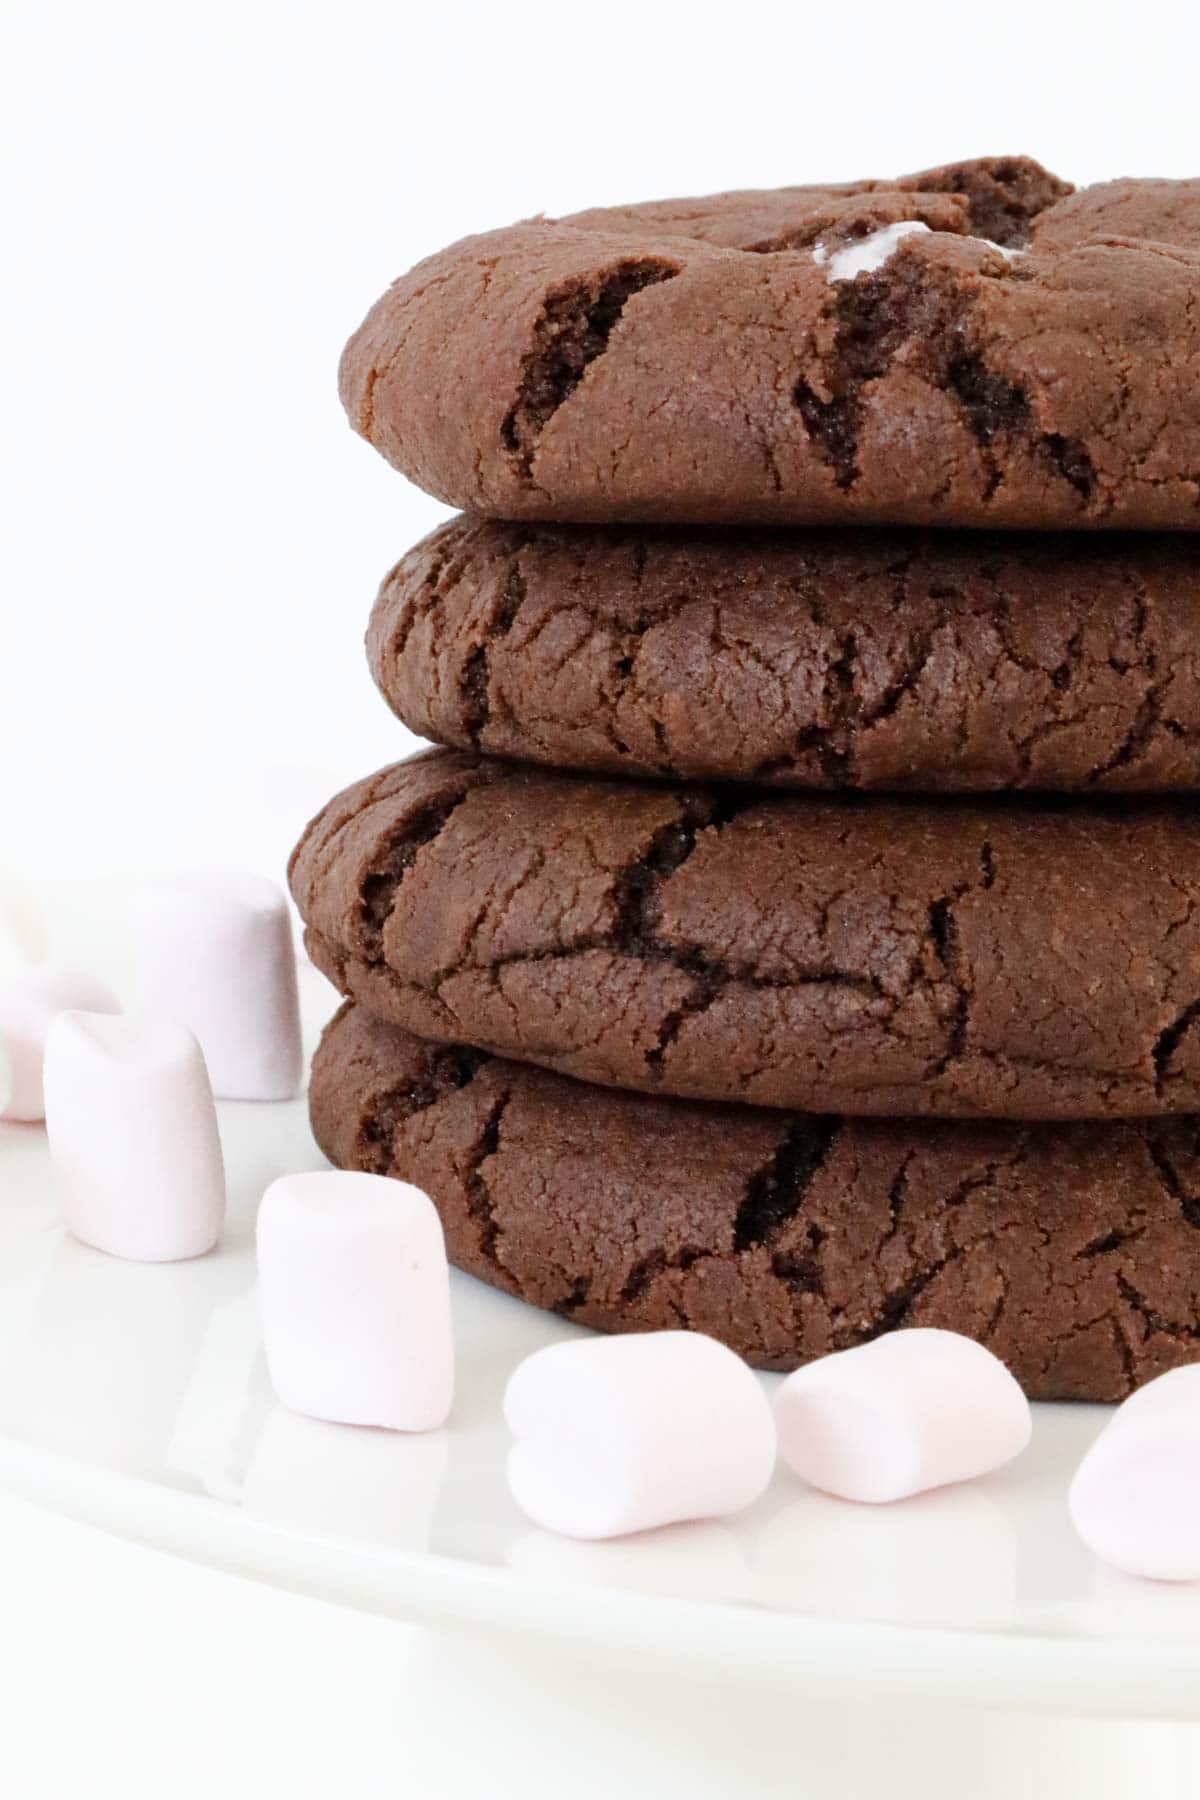 A pile of four chocolate cookies, surrounded by mini marshmallows.